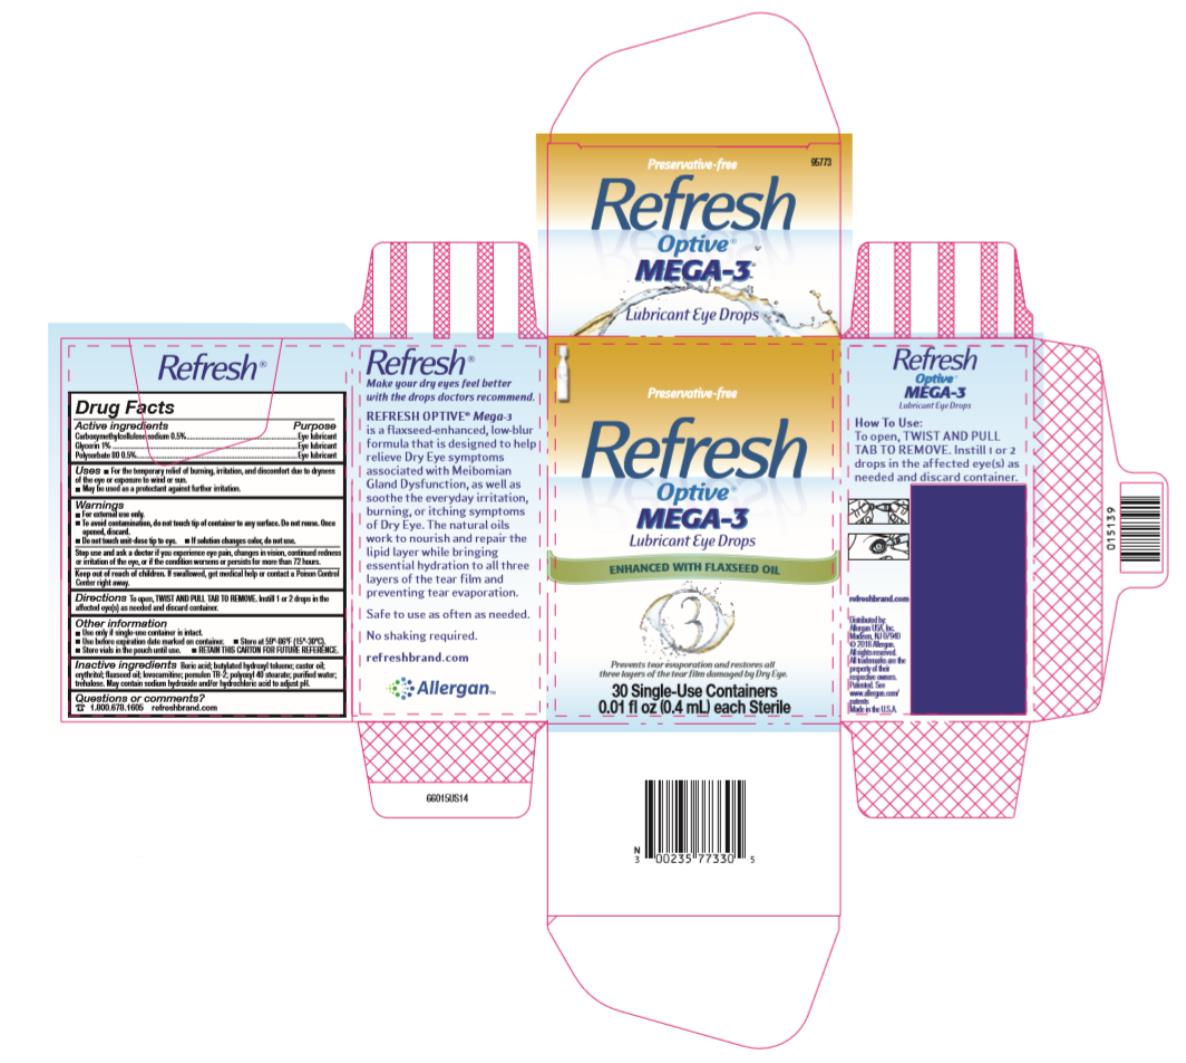 Preservative-free
Refresh 
Optive® 
MEGA-3
Lubricant Eye Drops 
ENHANCED WITH FLAXSEED OIL
Prevents tear evaporation and restores all
three layers of the tear film damaged by Dry Eye.
30 Single-Use Containers
0.01 fl oz (0.4 mL) each Sterile
